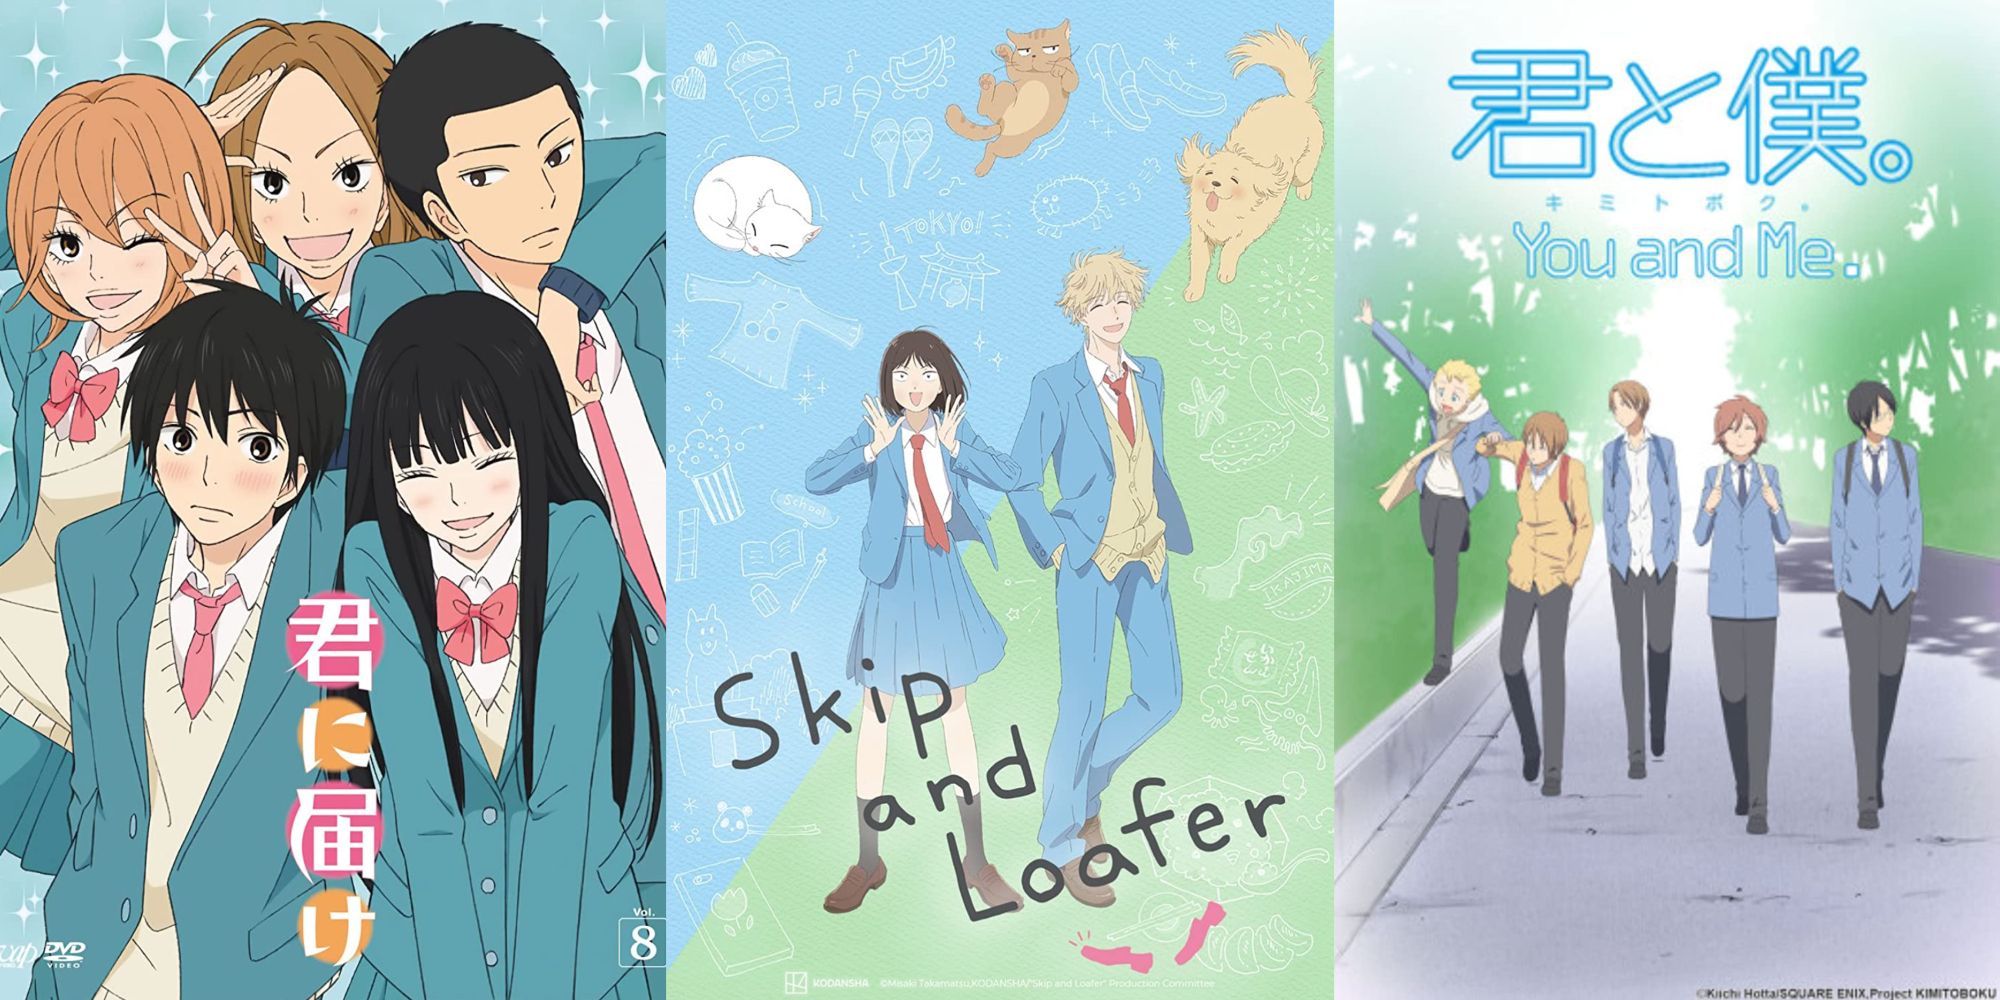 10 Slice Of Life Anime To Watch If You Love Skip And Loafer